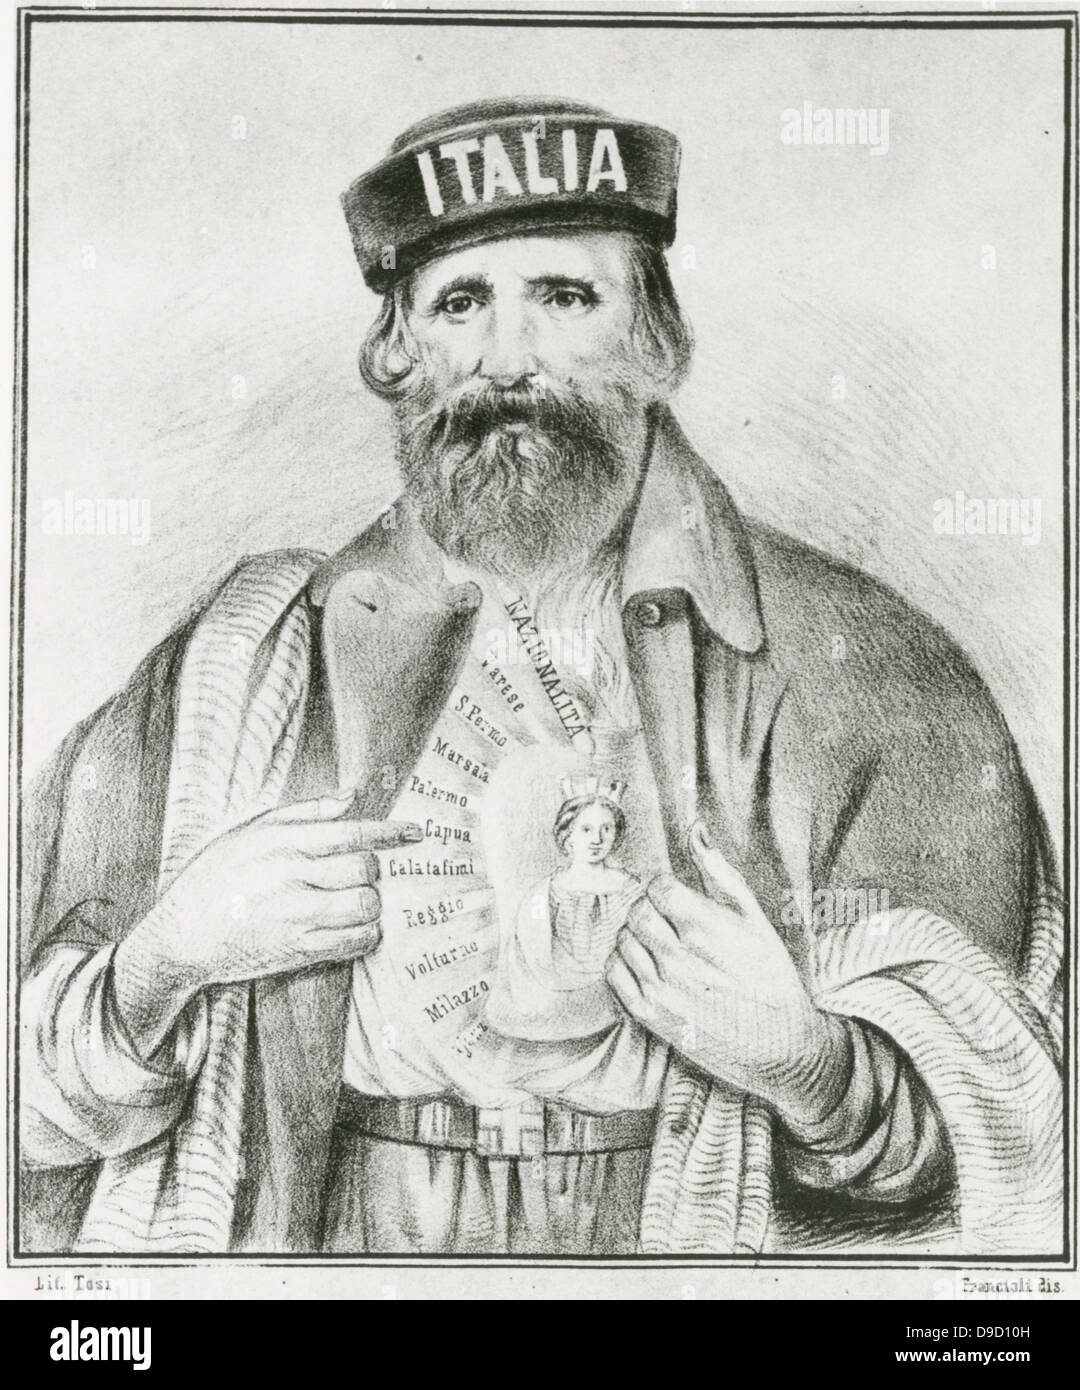 Giuseppe Garibaldi (1807-1882) Italian patriot, politican, general, and leader in the Risorgimento and the movement for the Unification of Italy. .  Allegorical print of Garibaldi with Italy on his heart. Stock Photo